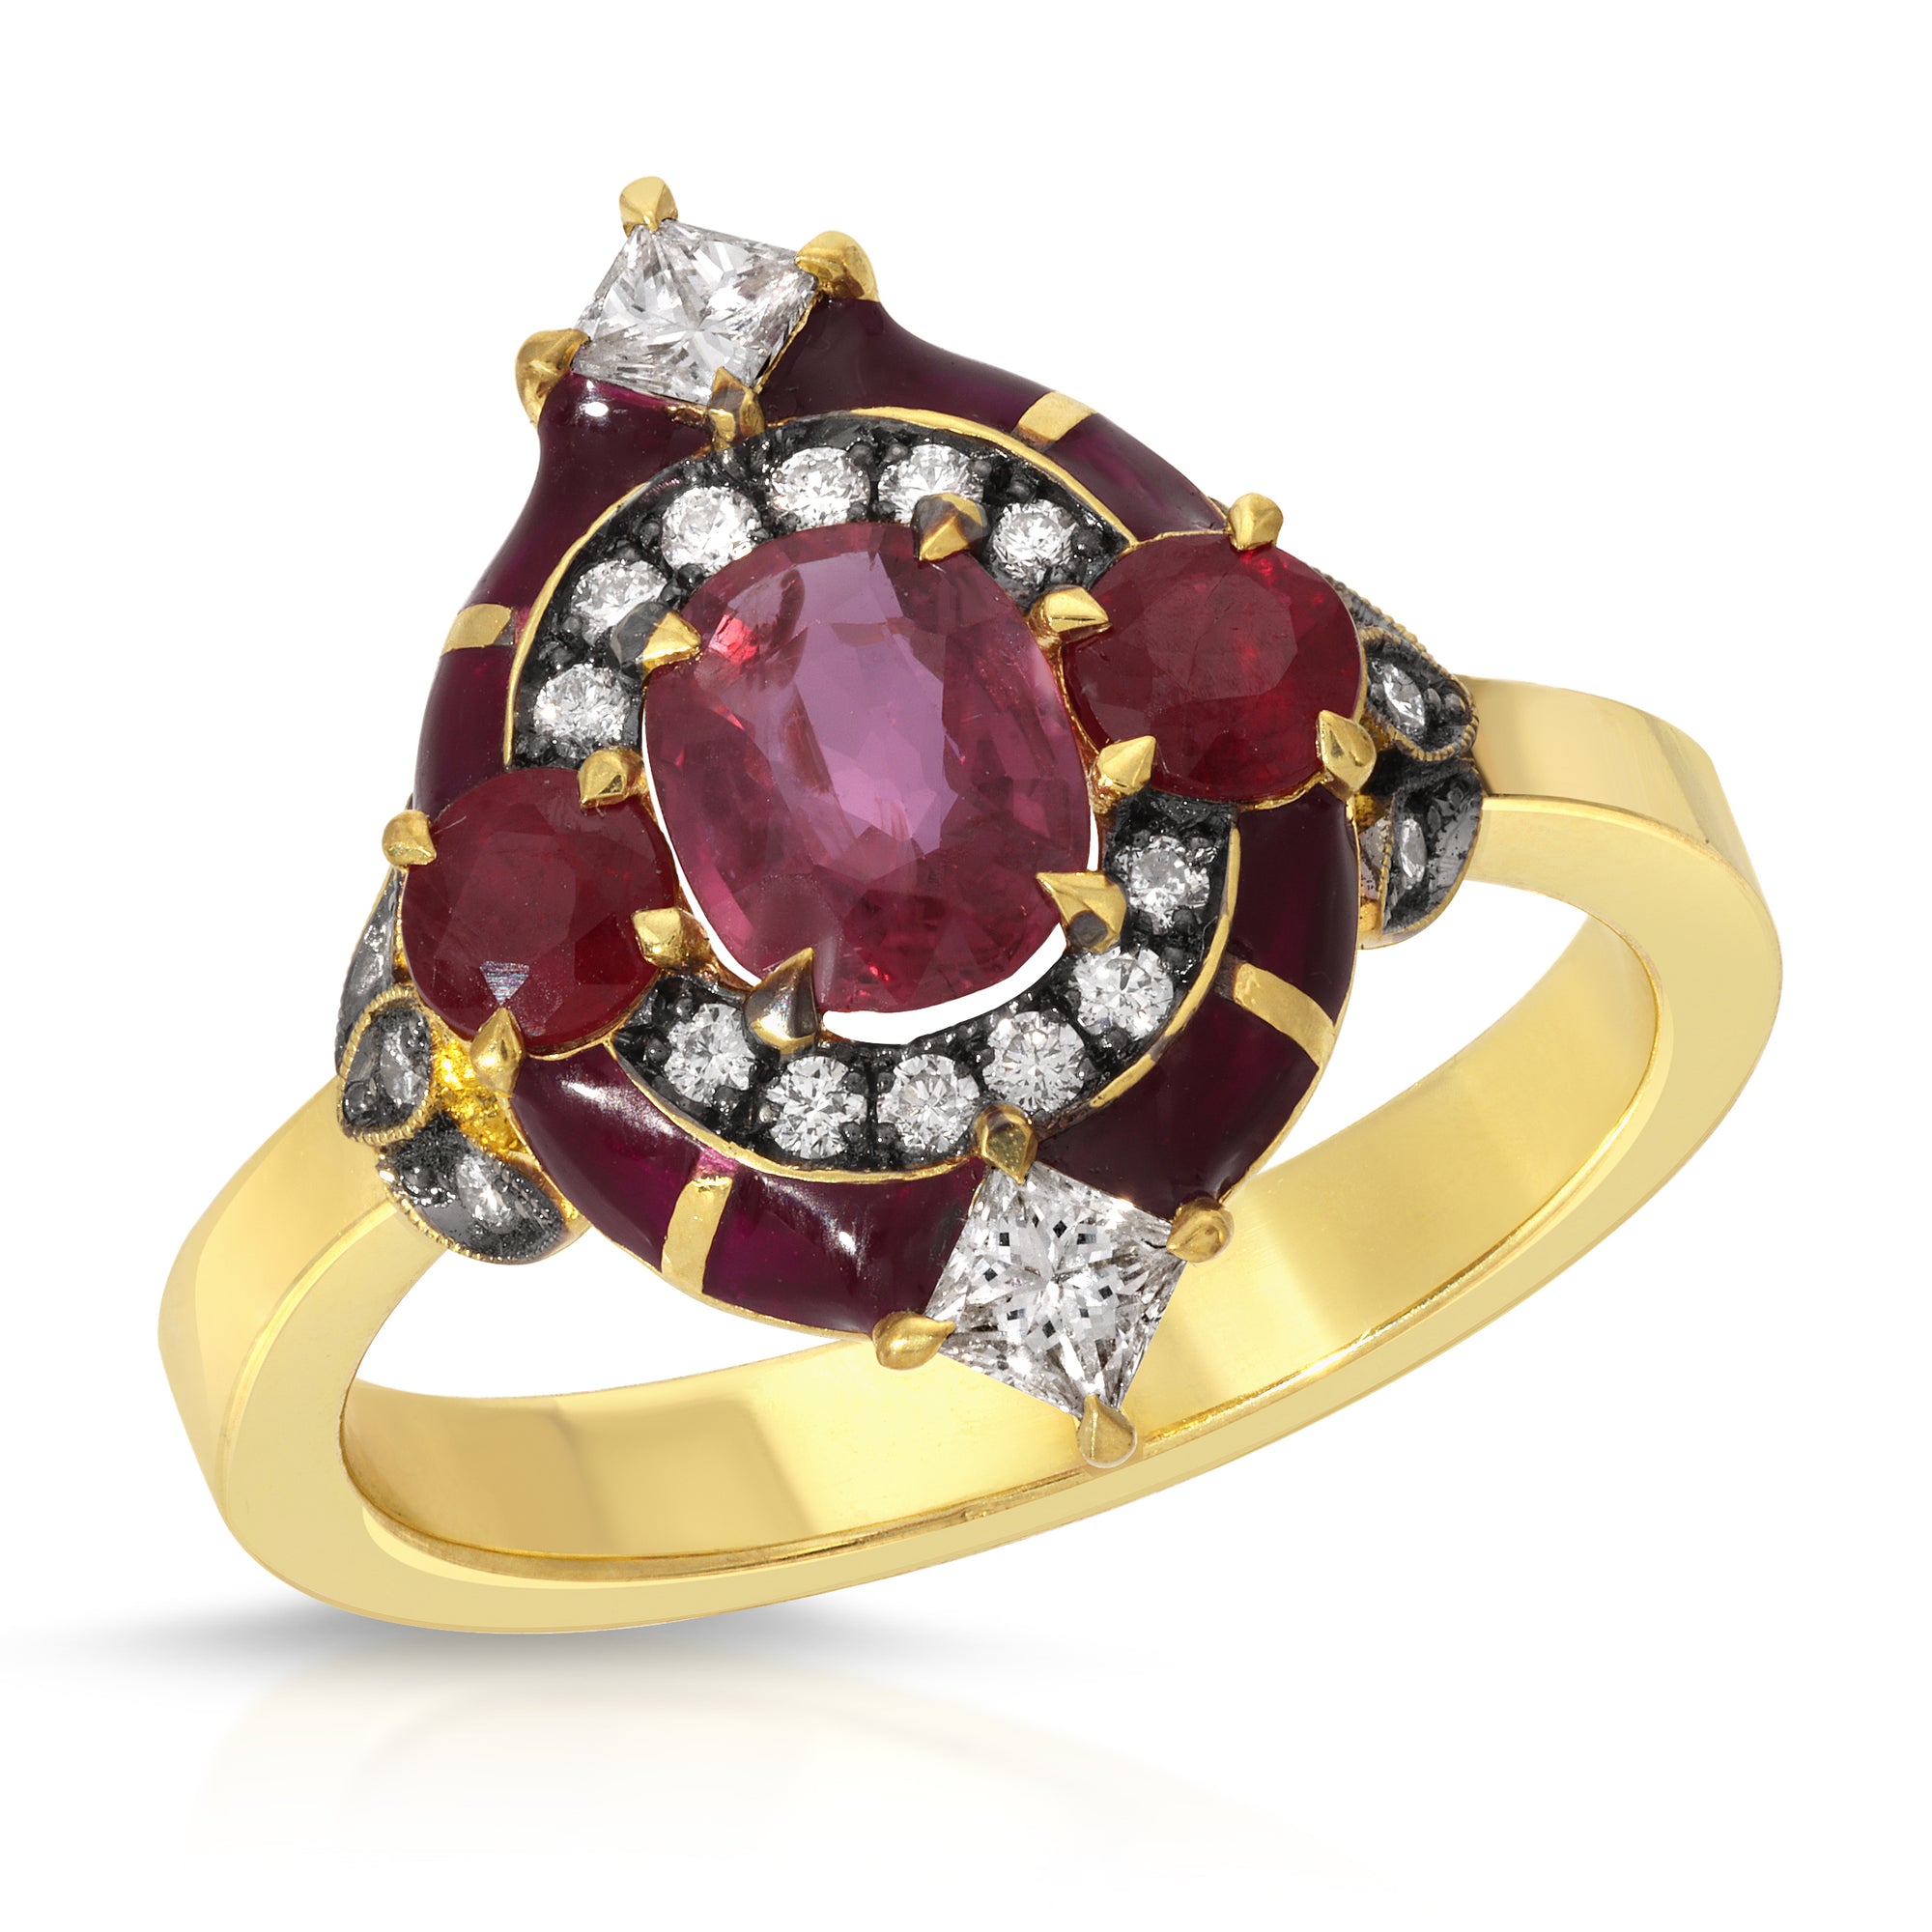 Heritage Ruby & Diamond Enamel Ring by Lord Jewelry available at Talisman Collection Fine Jewelers in El Dorado Hills, CA and online. This Heirloom Ruby Rock Candy Ring is truly special... The magnificent cocktail ring features a .69 ct ruby in the center, surrounded by .40 cts of rubies and .36 cts of diamonds, all set in 18k yellow gold accented with ruby red enamel. Red is the color of love for a reason...!